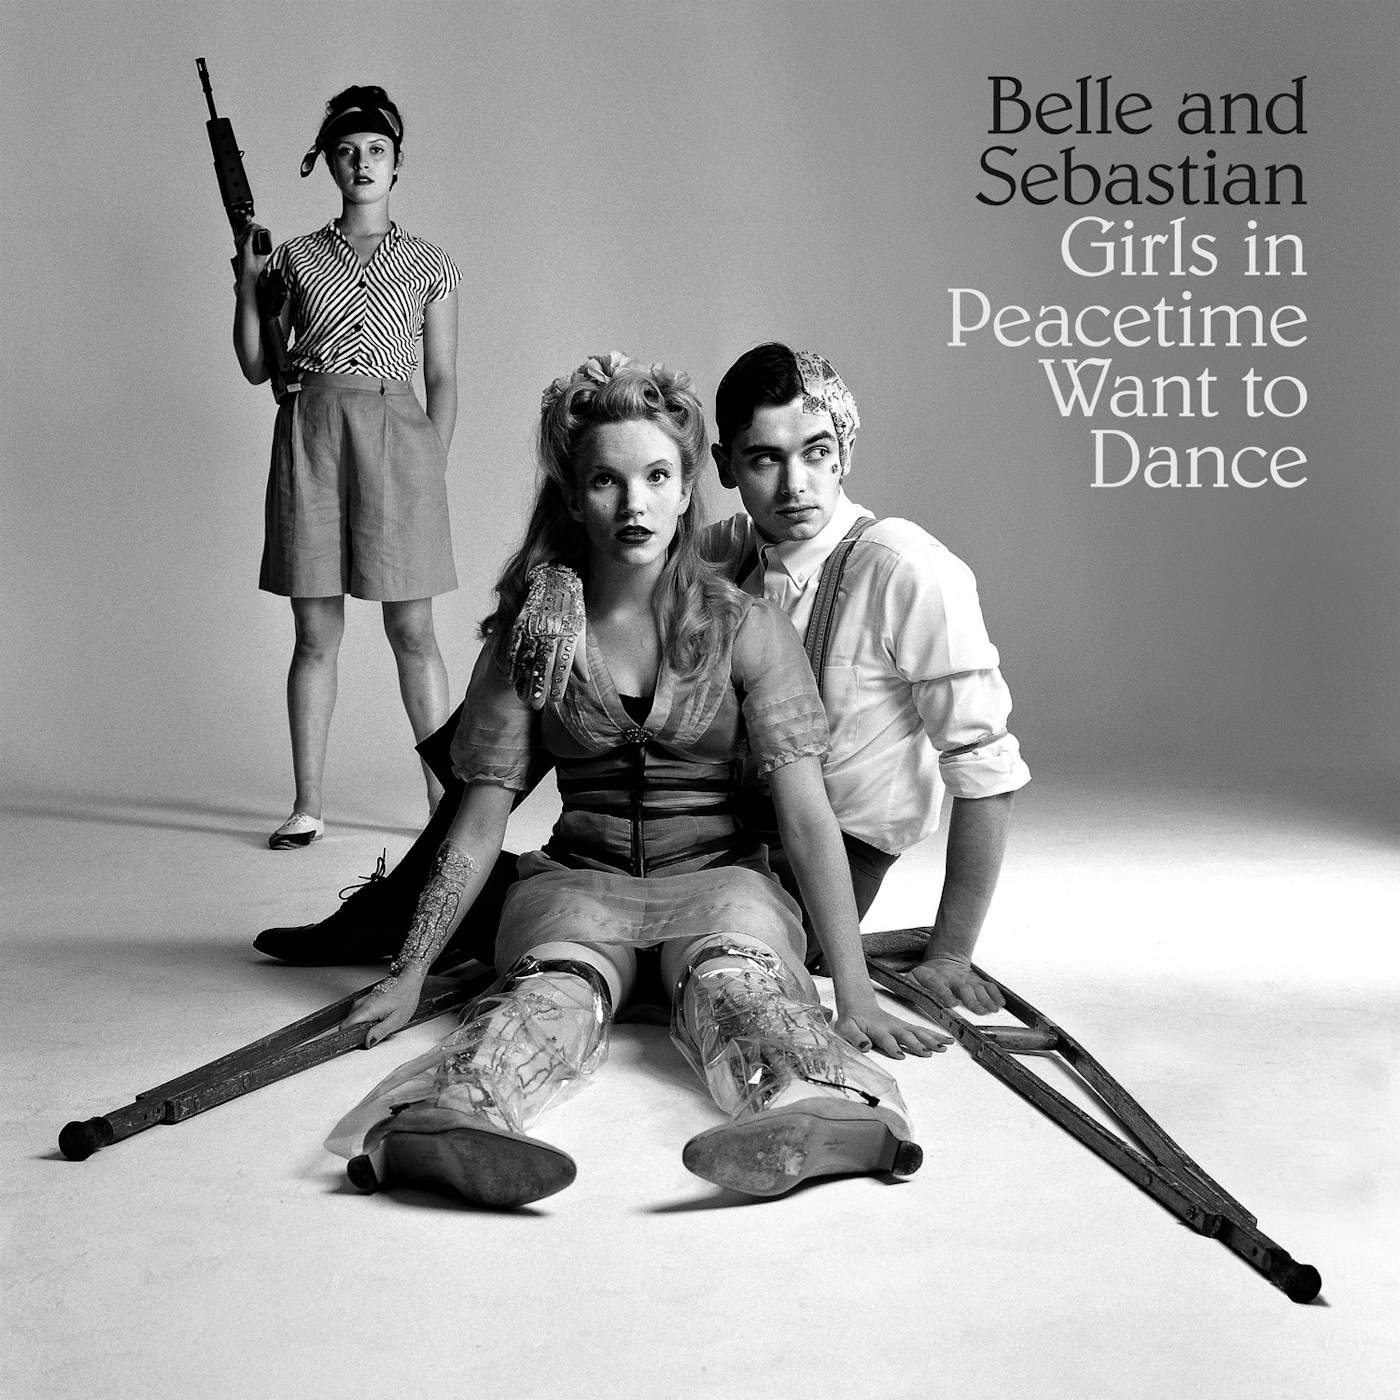 Belle and Sebastian Girls in Peacetime Want to Dance Vinyl Record